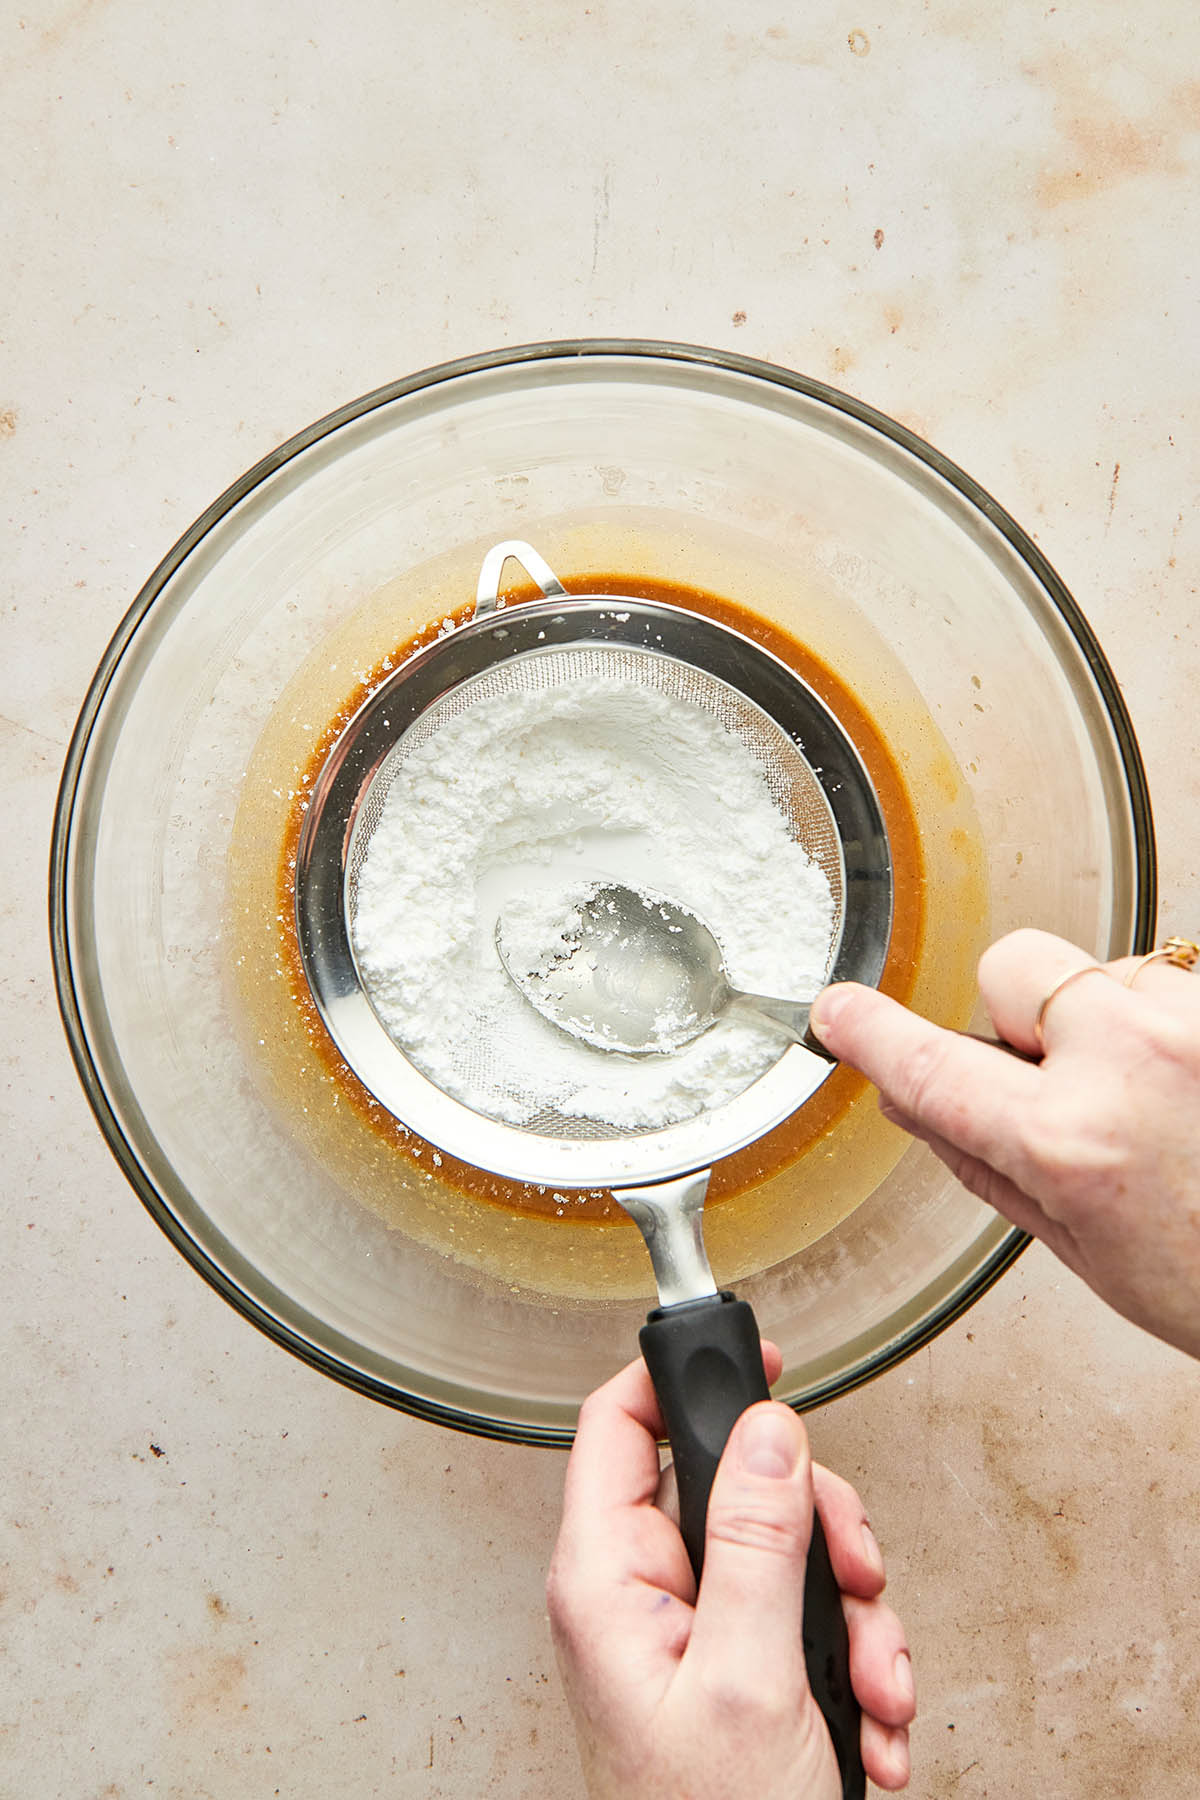 A hand using a spoon to sift powdered sugar into a glass mixing bowl with peanut butter inside.